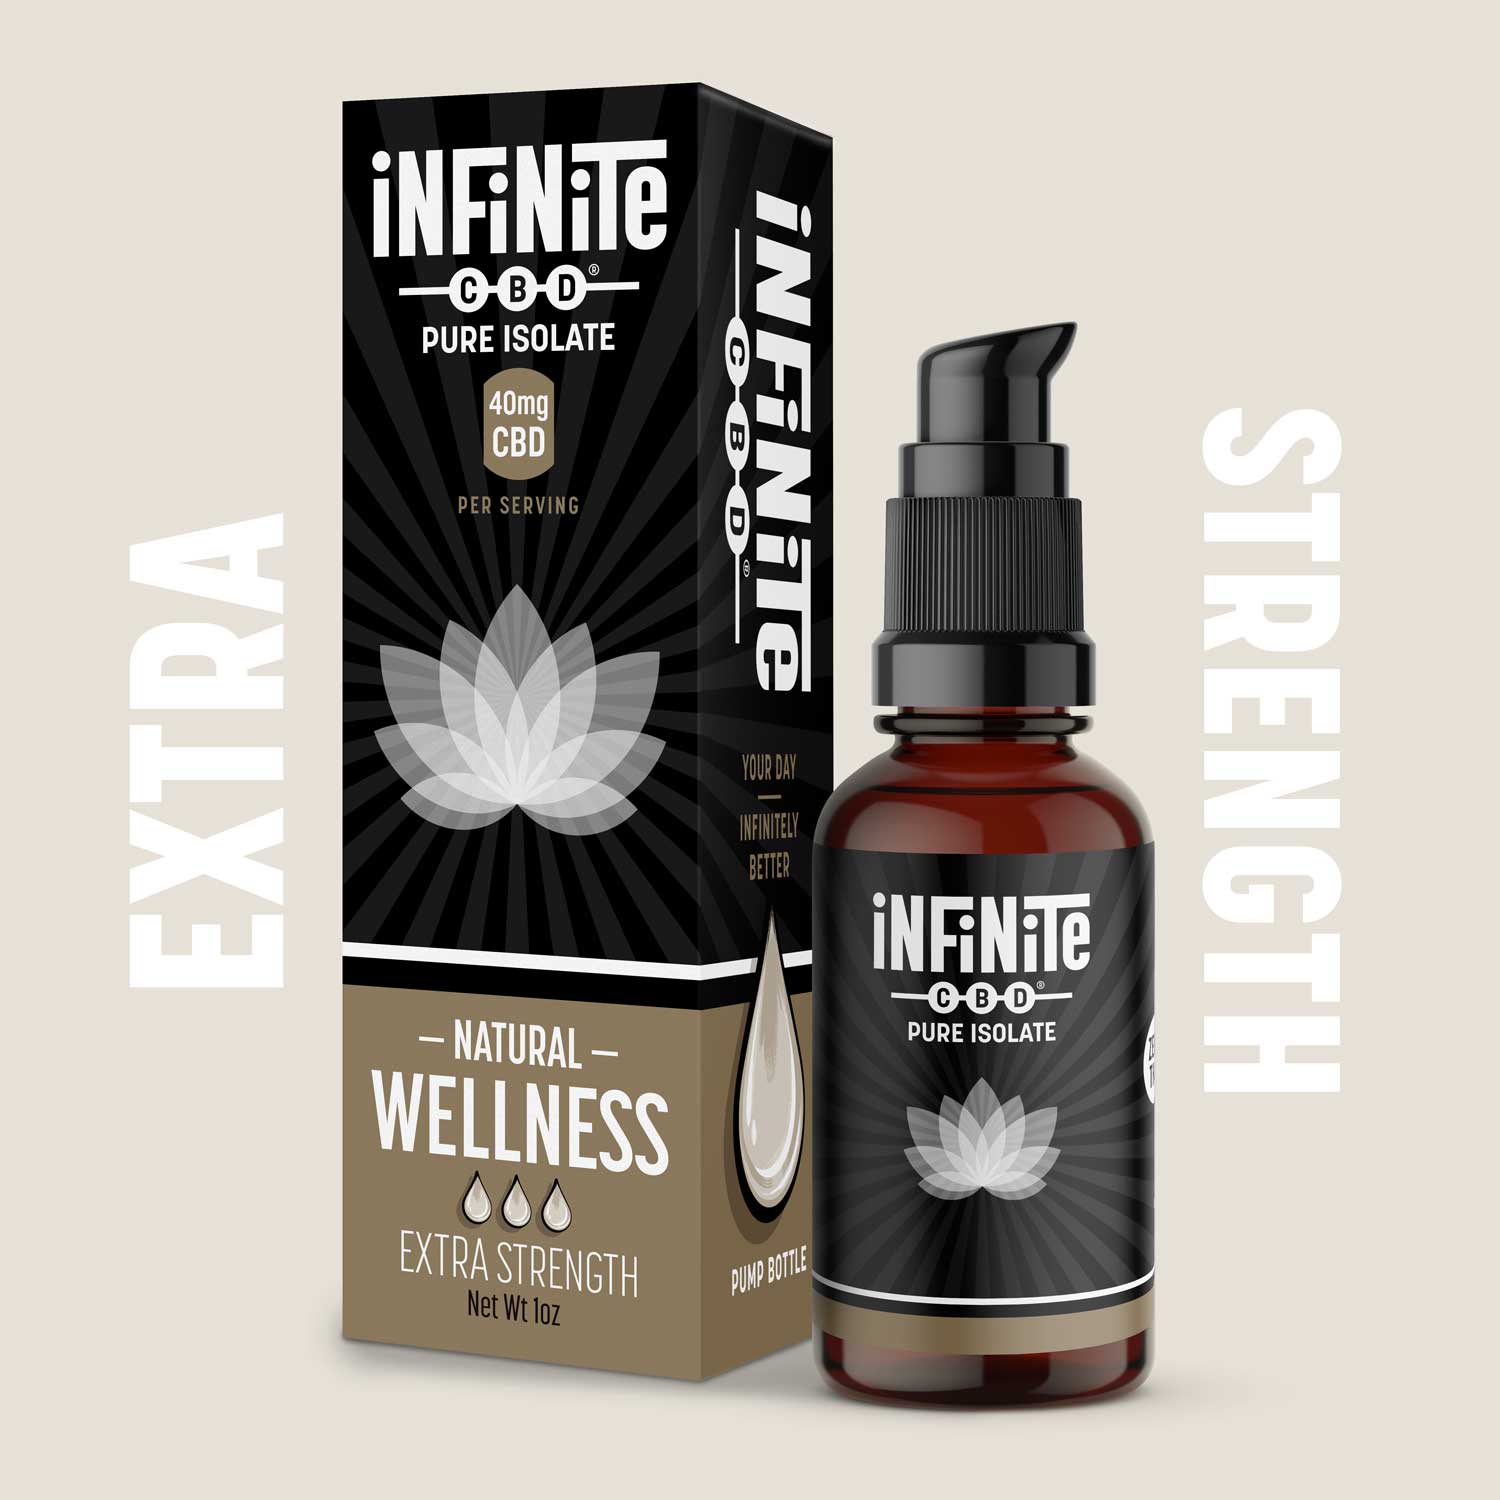 Tinctures<br>Formulation: Wellness<br>CBD: Pure Isolate (Zero THC)<br>Strength: Extra (40mg/serving)